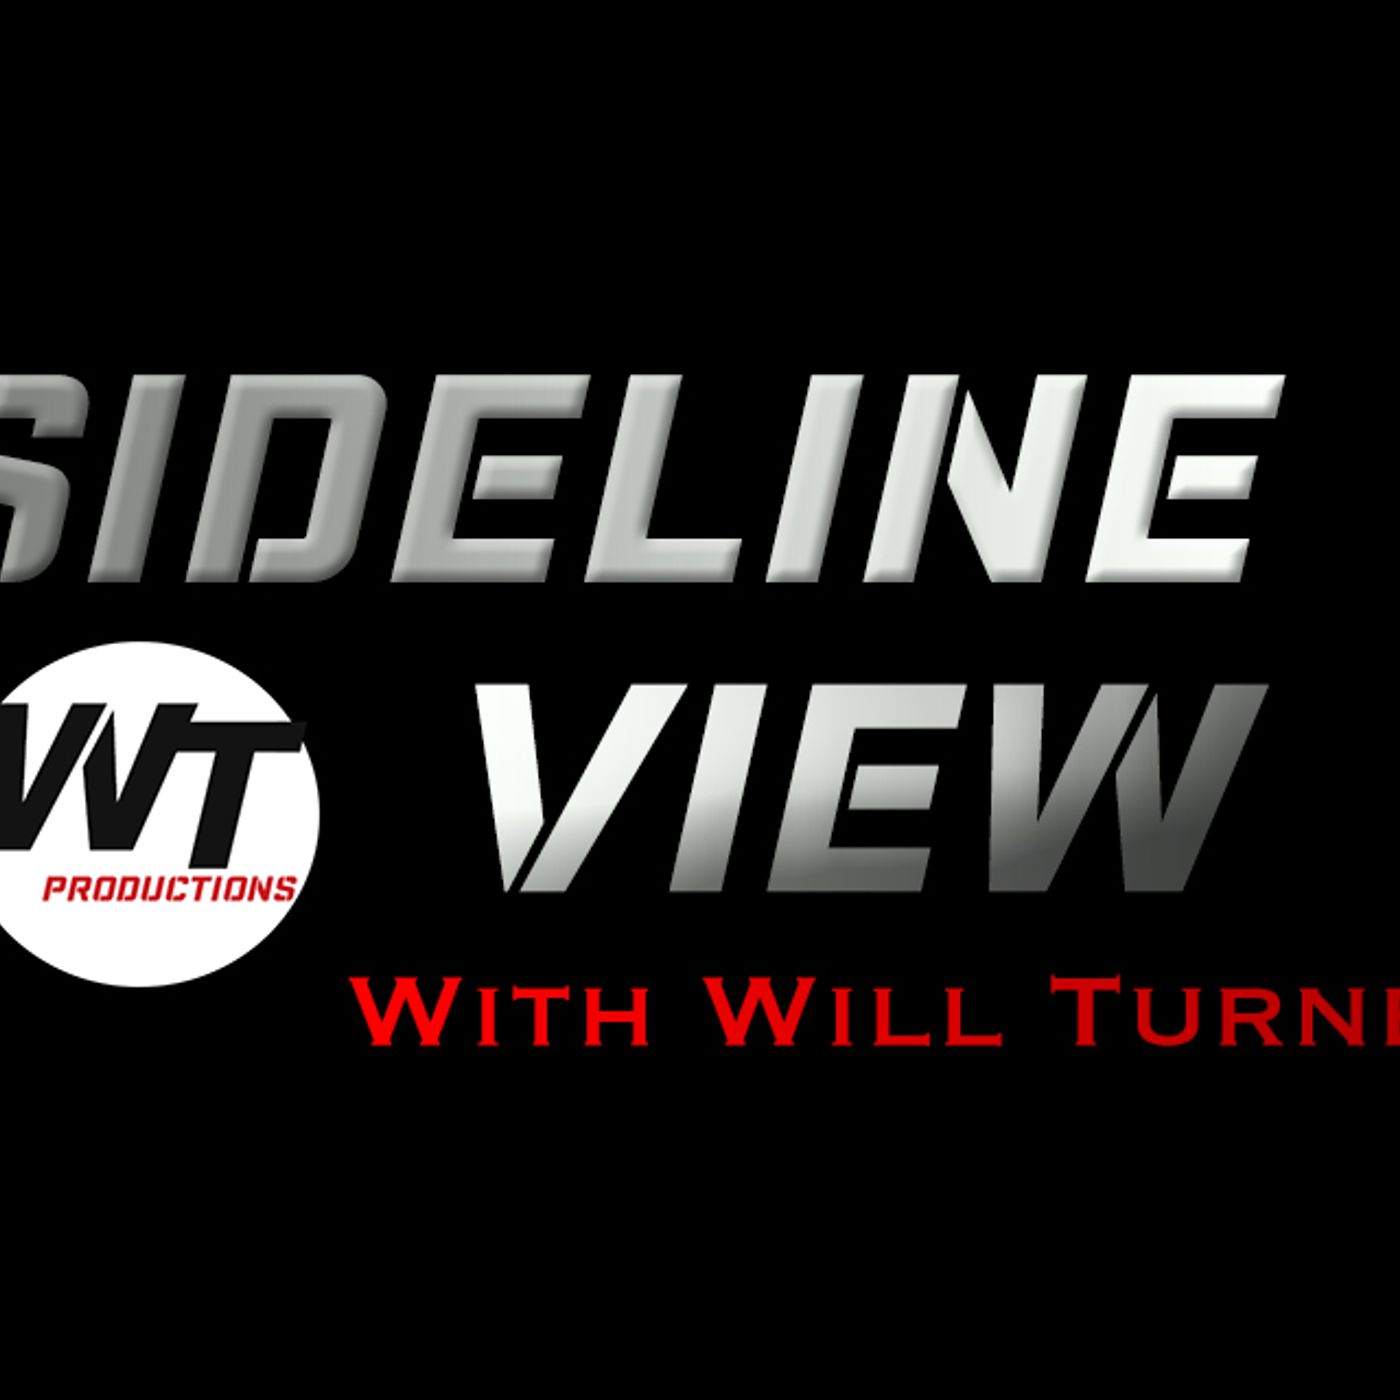 Sideline View with Will Turner